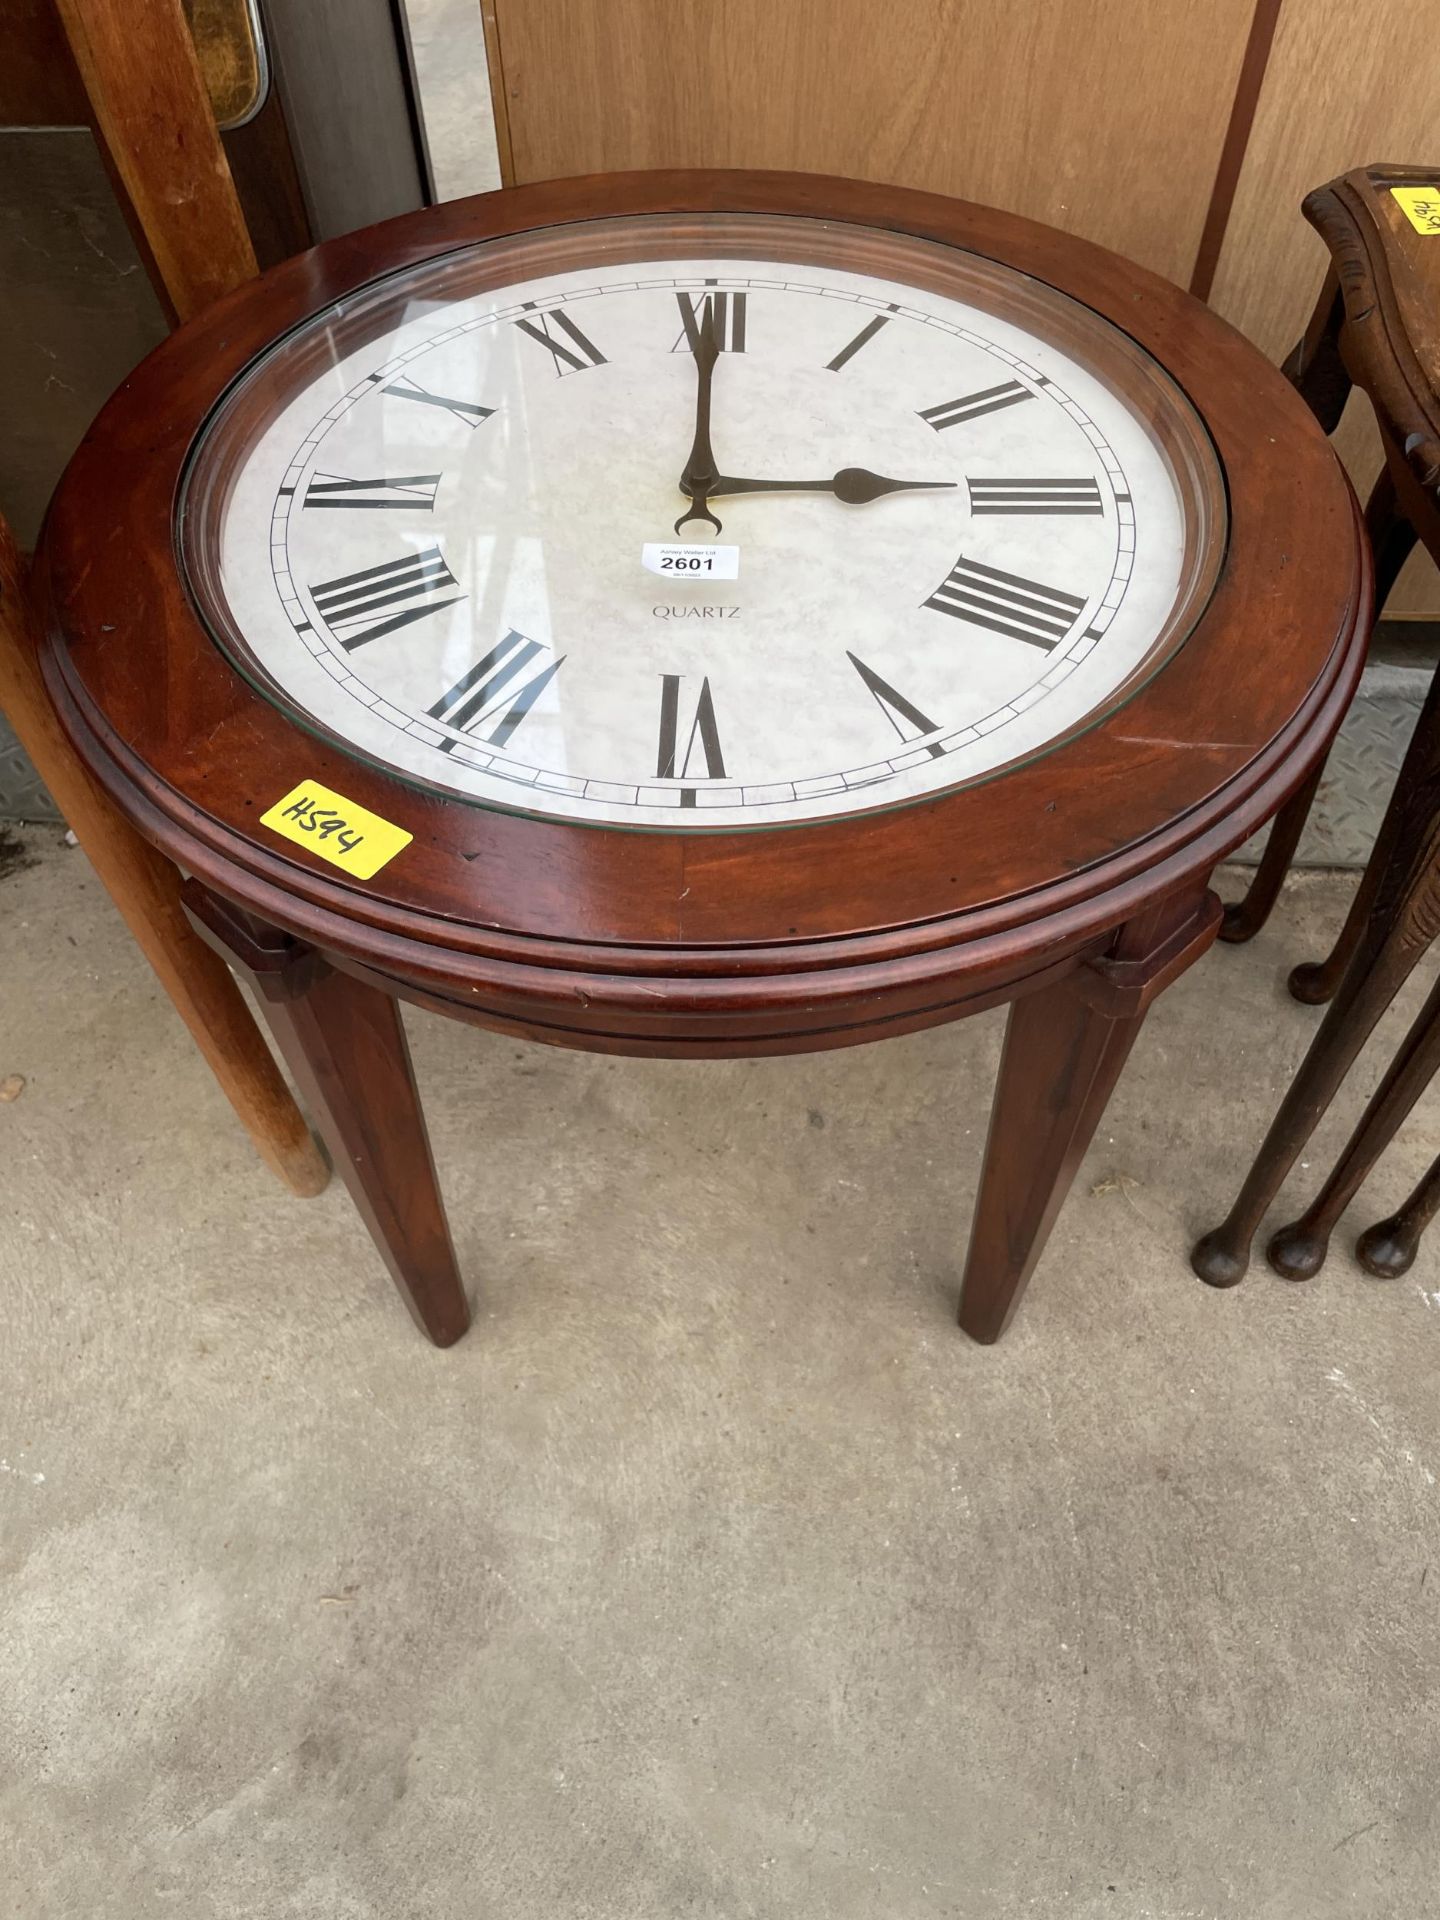 A 22" DIAMETER OCCASIONAL TABLE, THE GLASS TOP REVEALING QUARTZ CLOCK WITH ROMAN NUMERALS